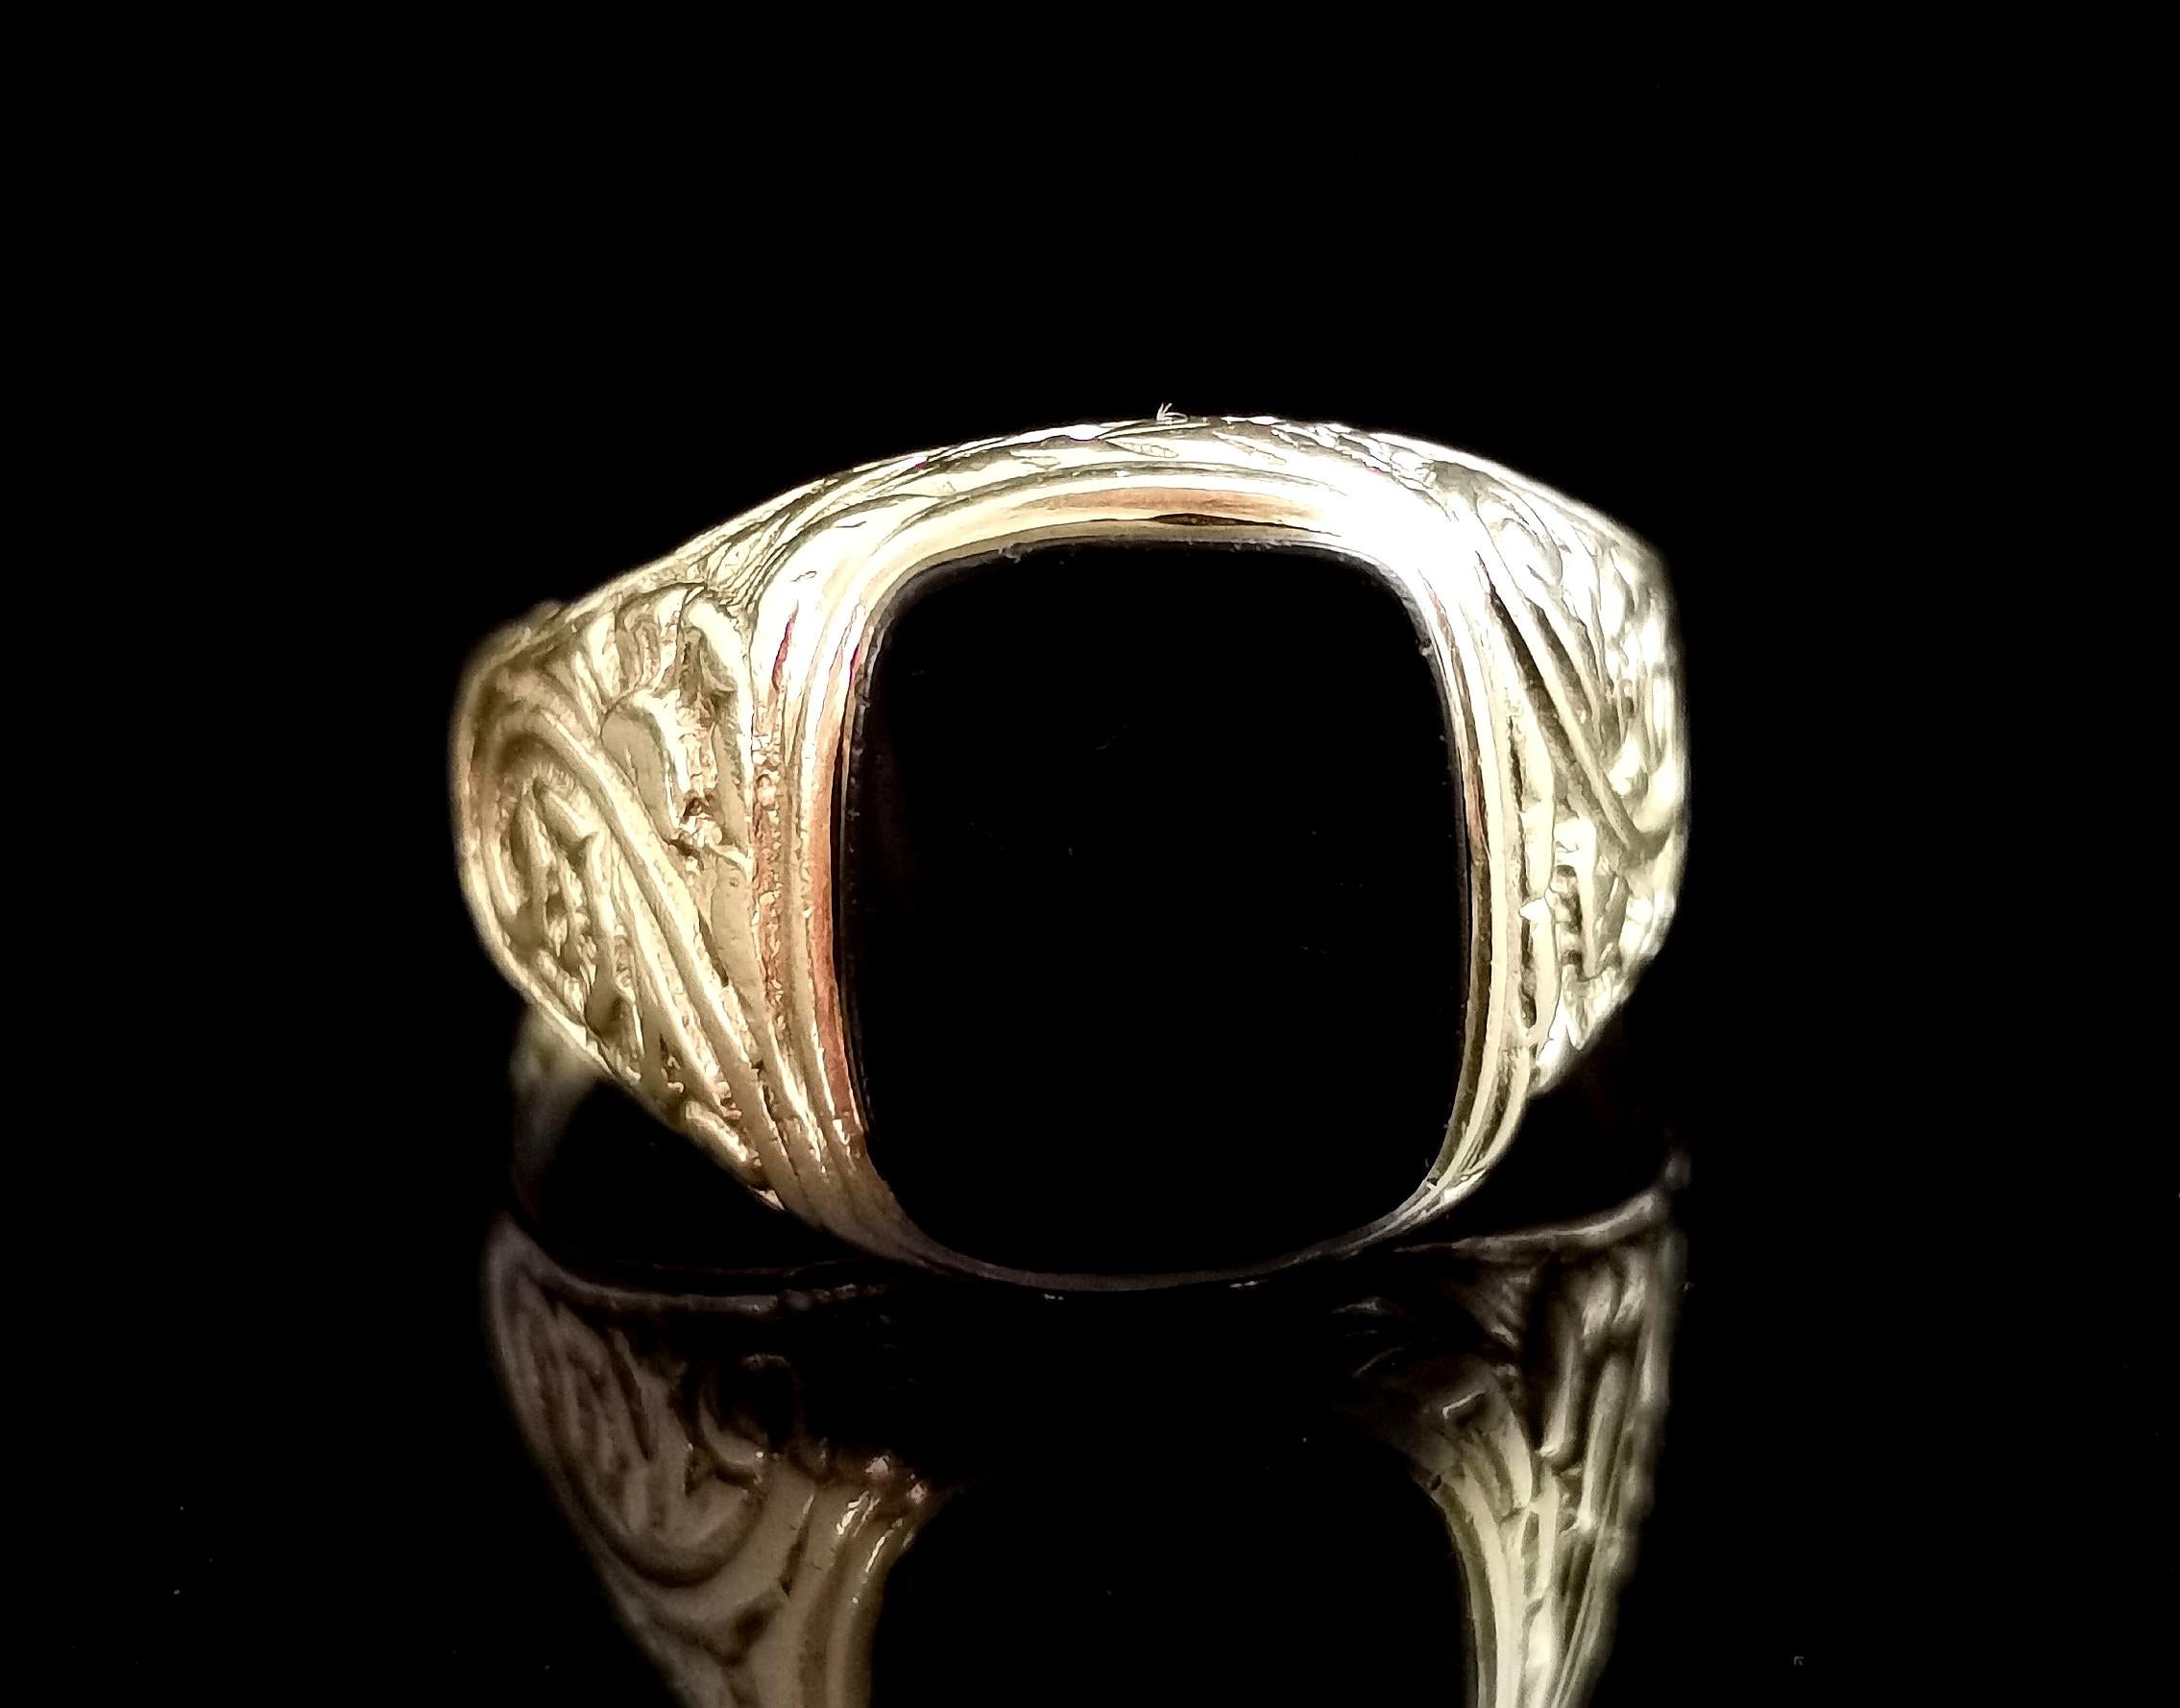 A handsome vintage Onyx signet ring in 9kt yellow gold.

This is a really grand vintage signet ring in a rich yellow gold, the decorative engraved shoulders with a floral and swirl design.

The front set with a smooth polished onyx stone, the onyx